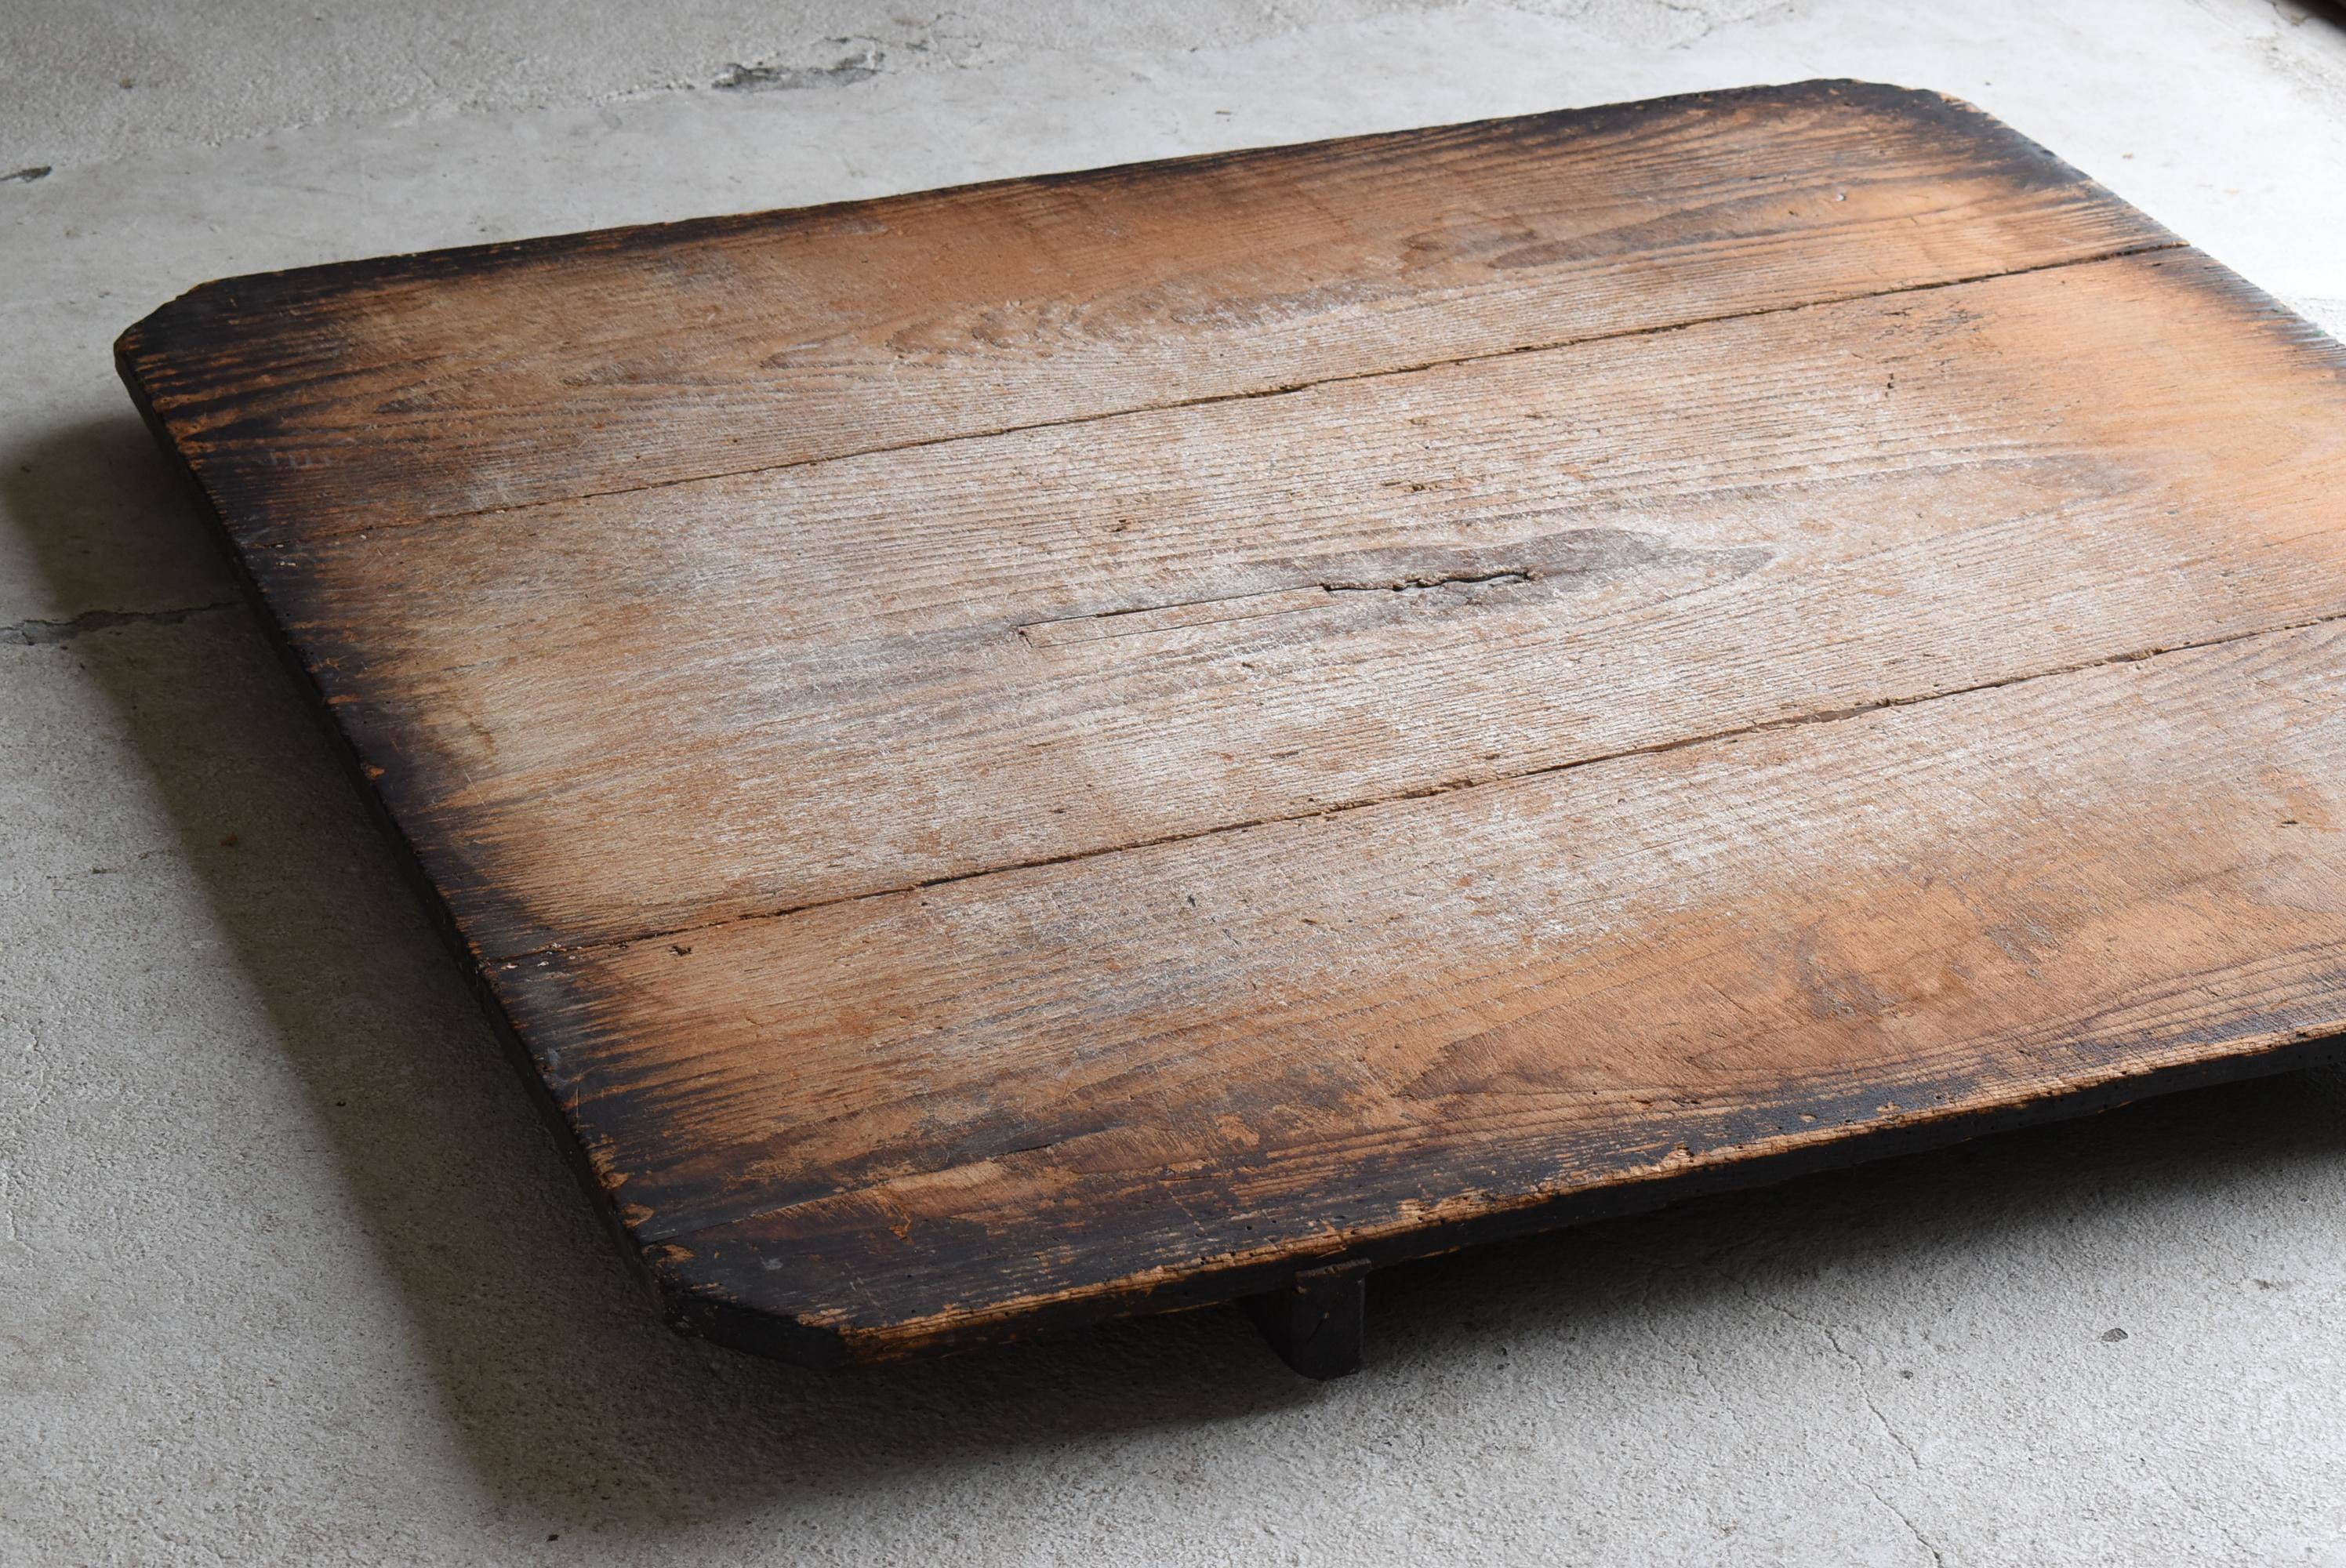 Japanese Antique Large Wooden Board 1860s-1900s / Low Table Wabi Sabi 6